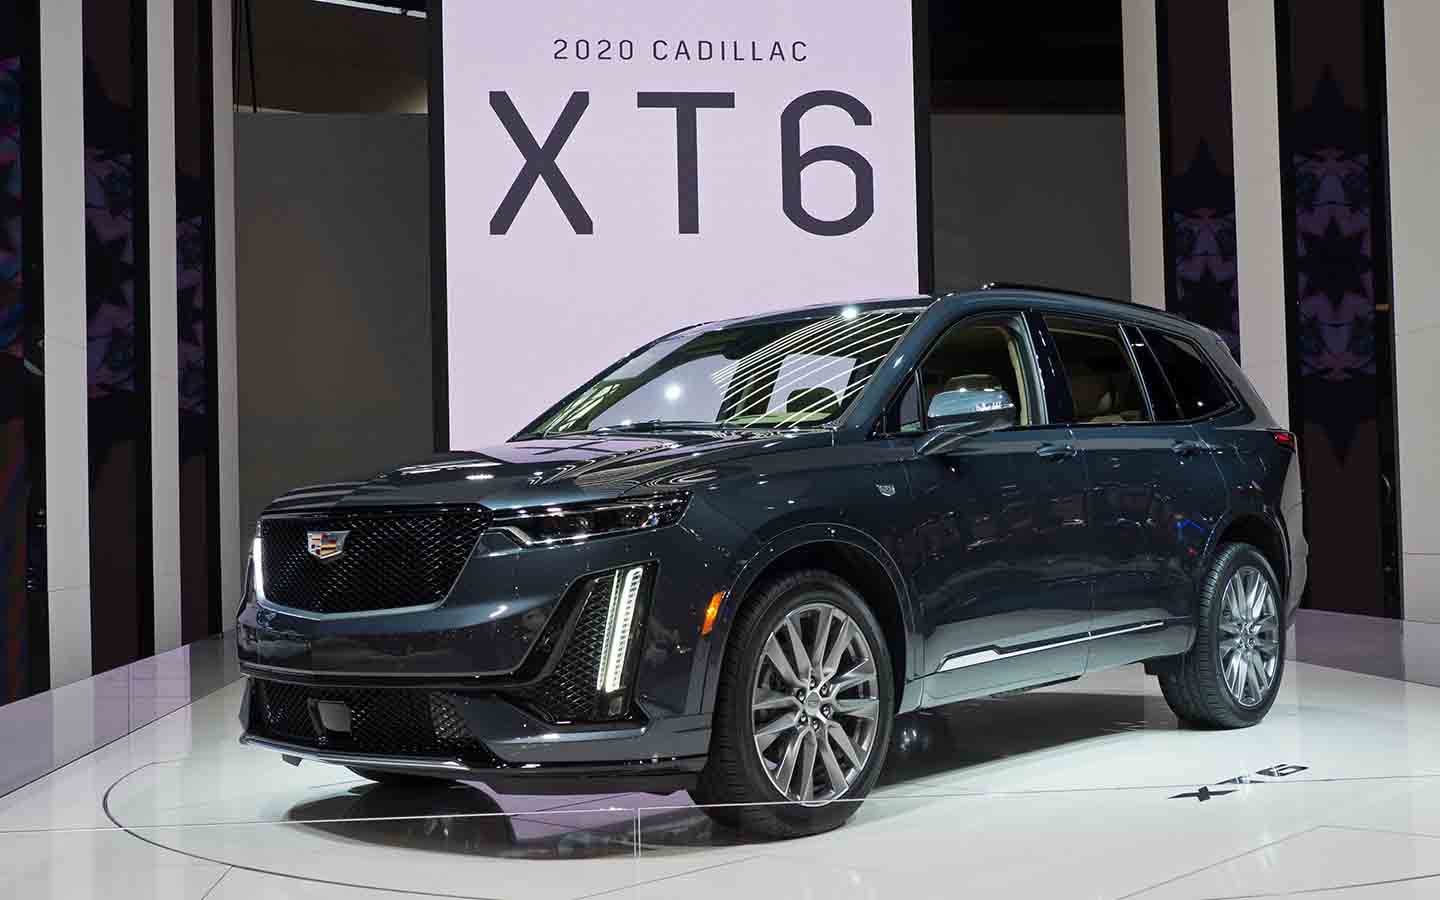 cadillac xt6 comes with a 3.6-litre v6 engine